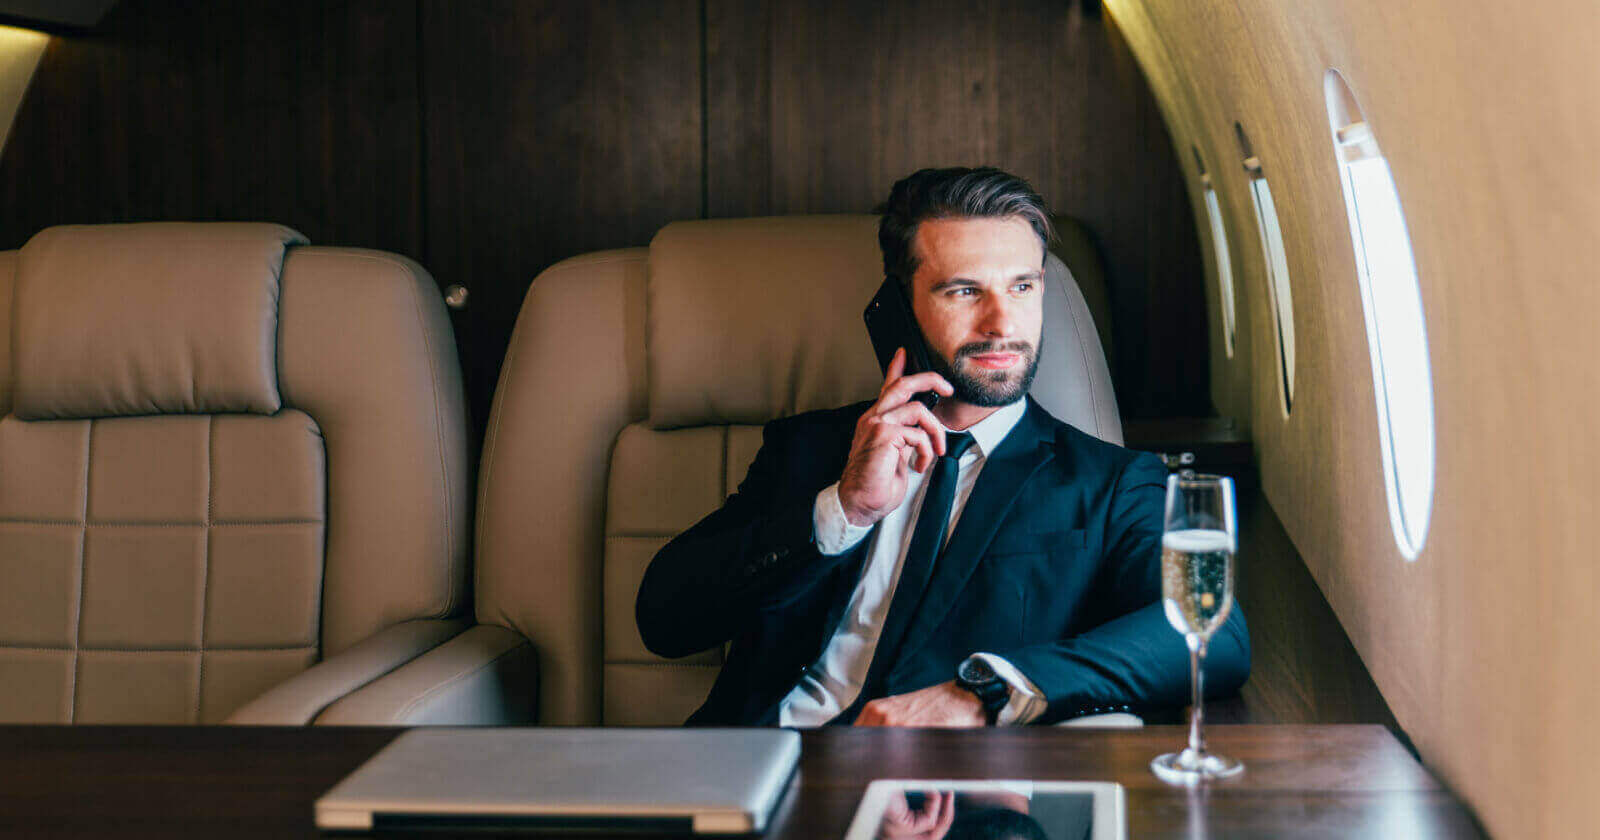 The Best Airlines for International Business Class Travel